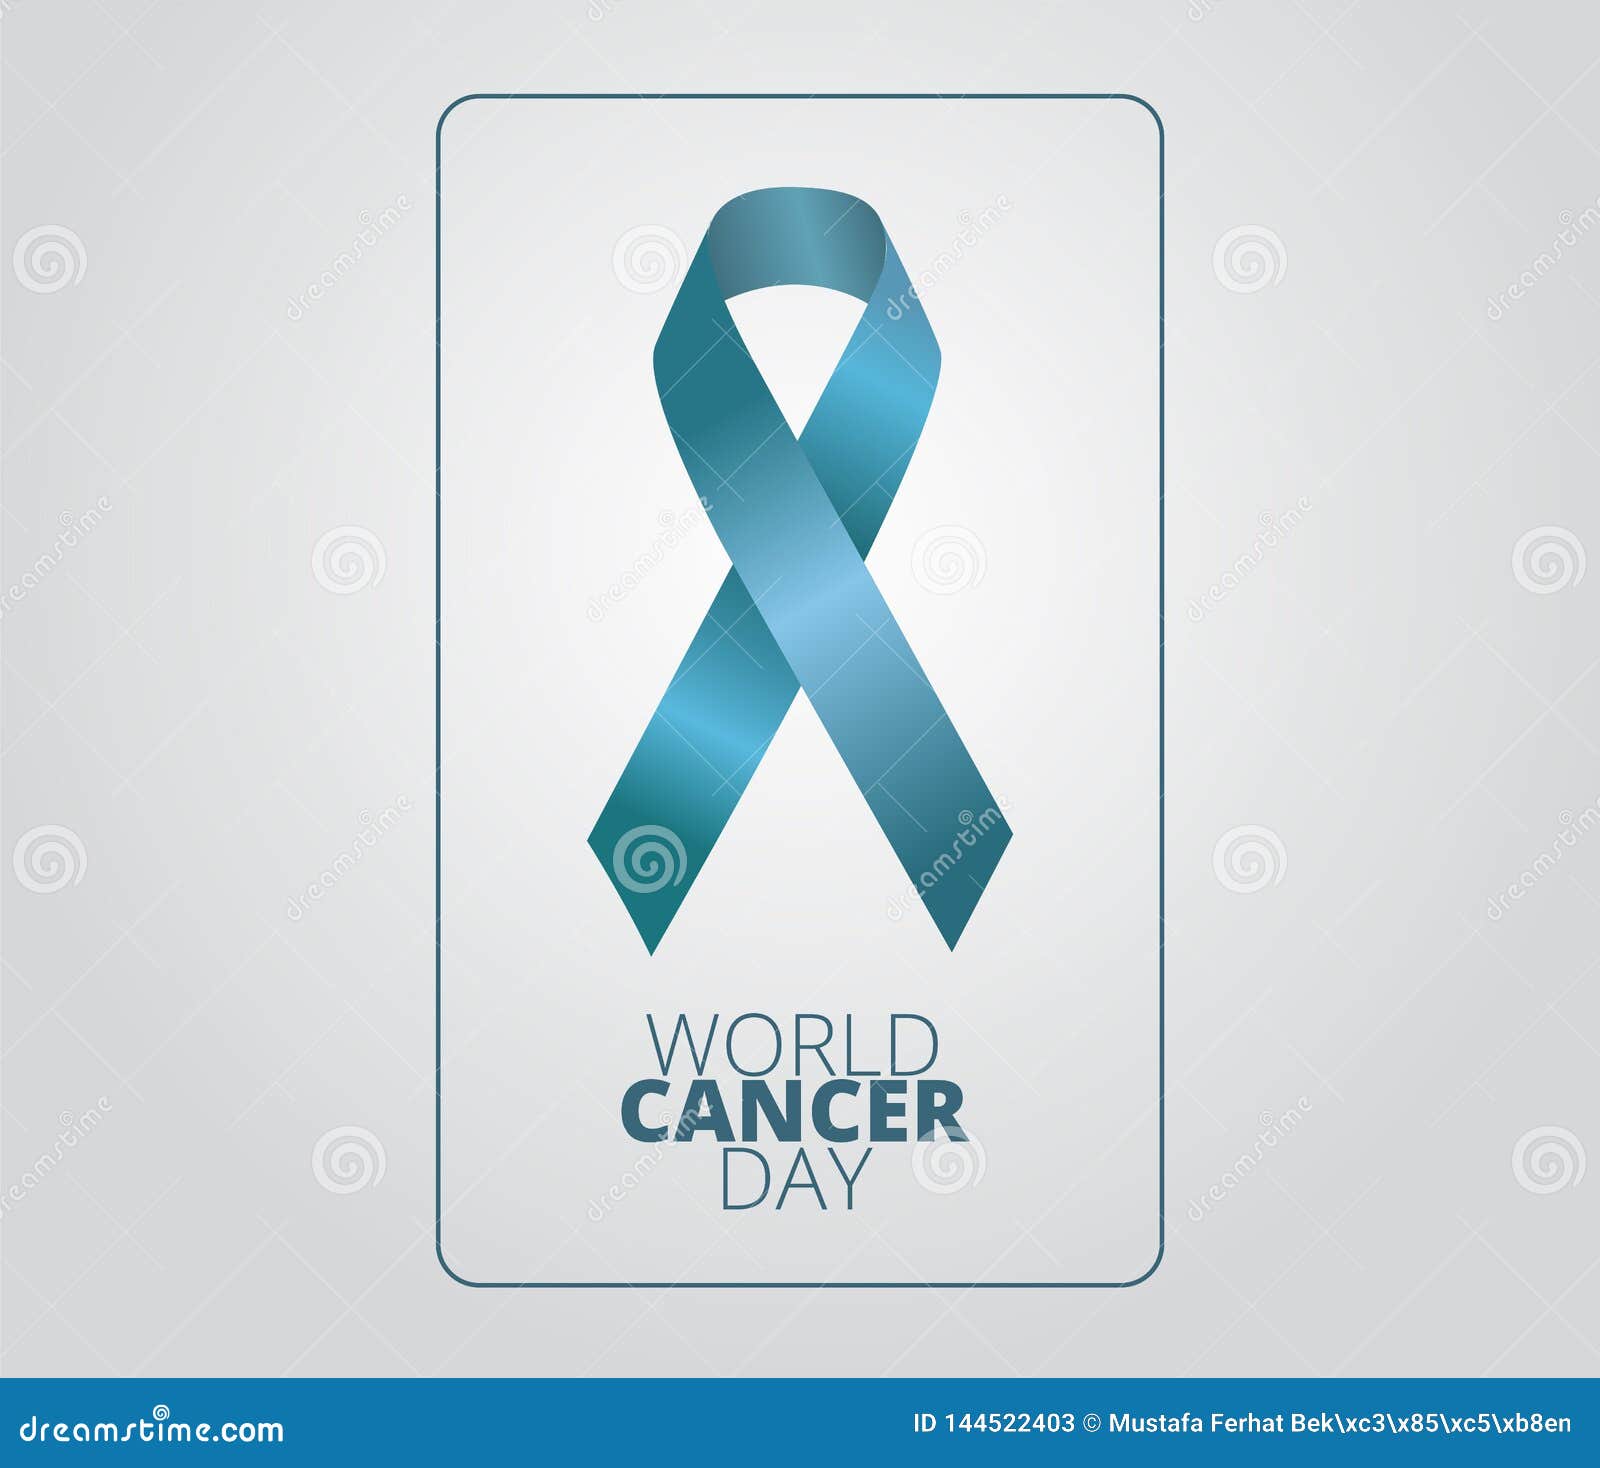 World Cancer Day Concept. Medicine and Healthcare Image. Editable ...